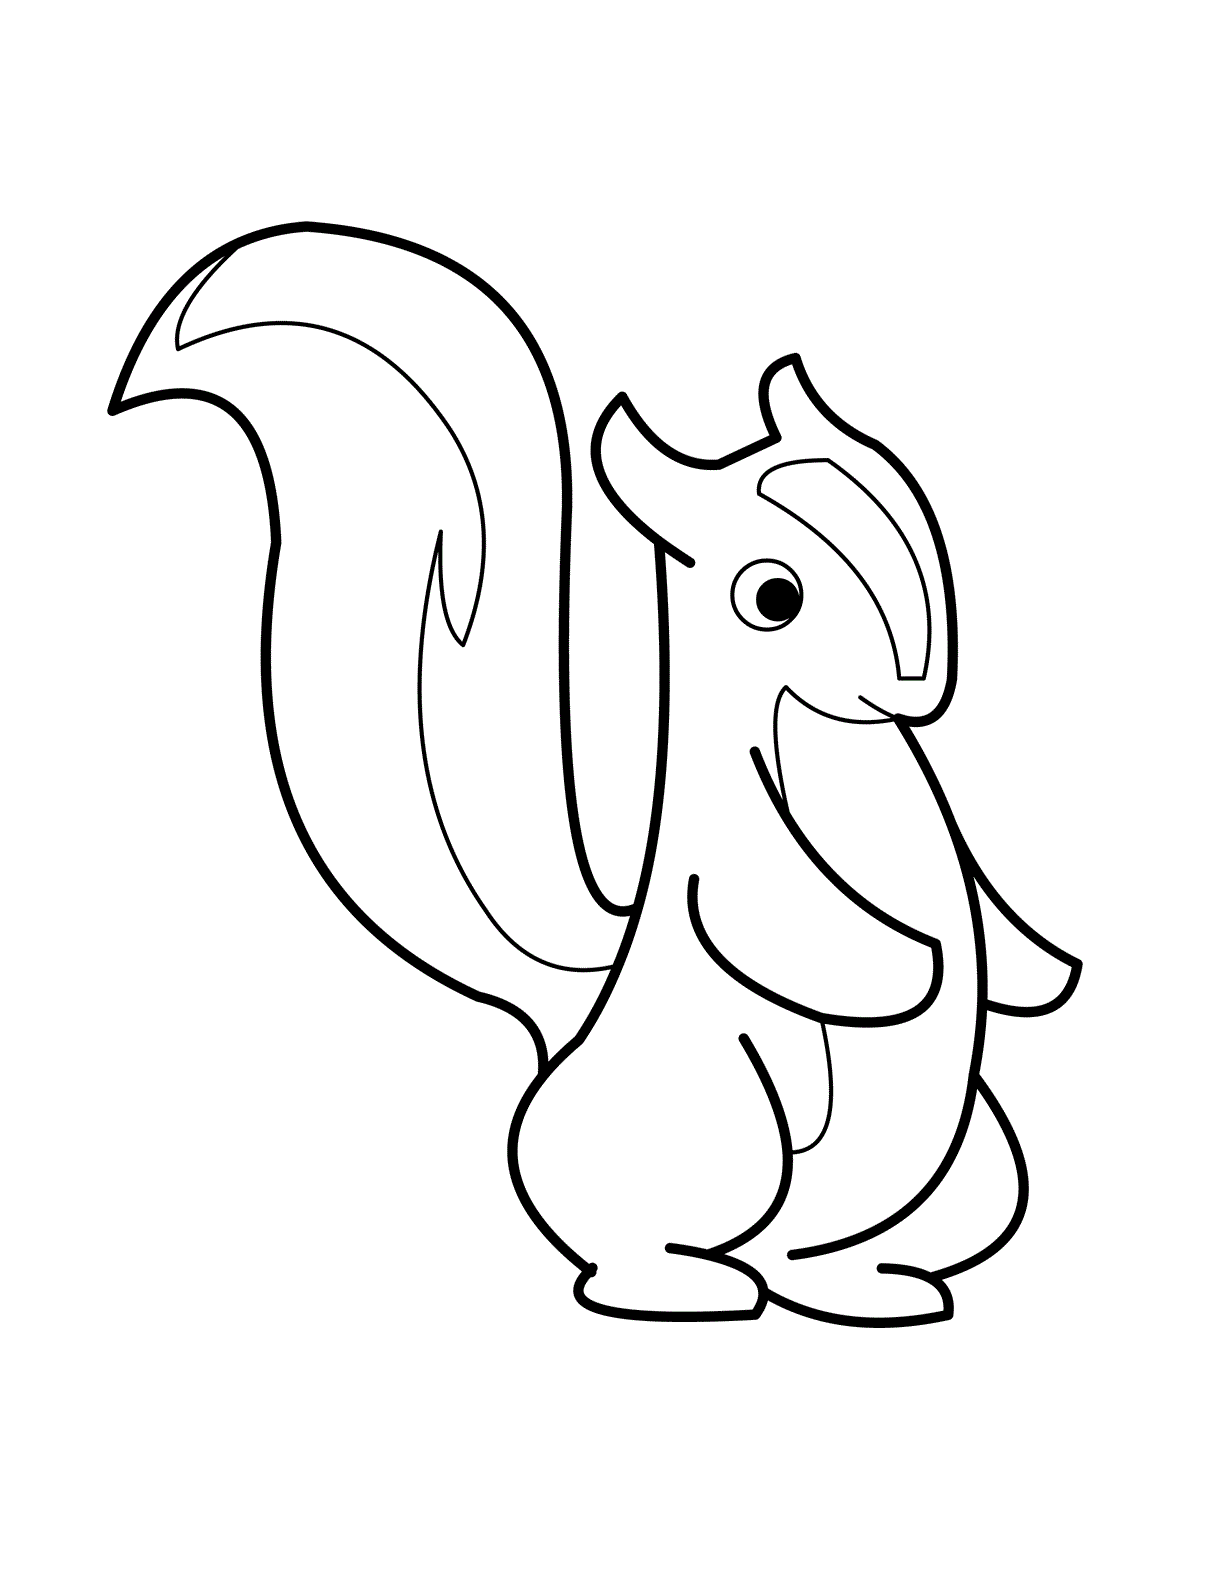 Mammals Skunks coloring page for kidsFree coloring pages for kids ...